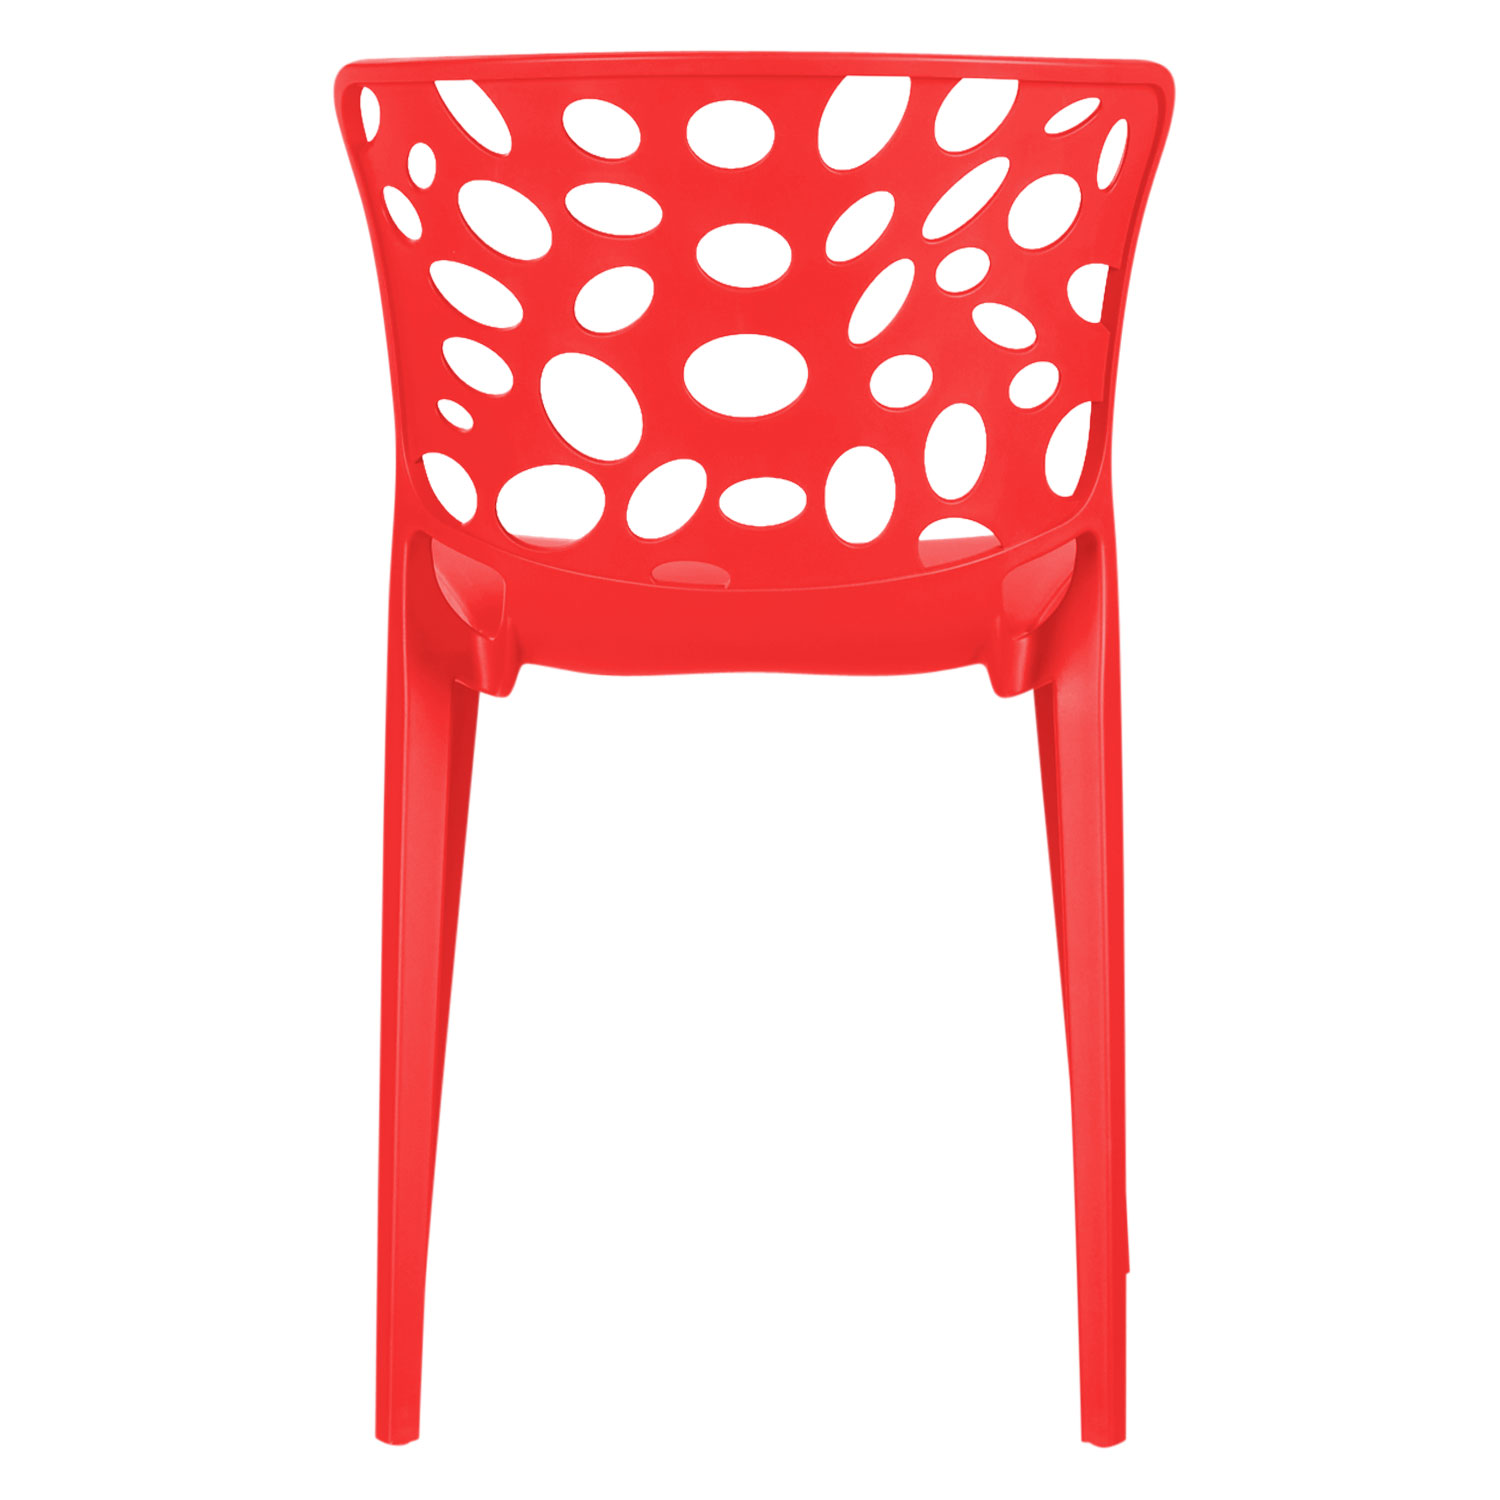 Garden chair Set of 6 Modern Red Camping chairs Outdoor chairs Plastic Stacking chairs Kitchen chairs